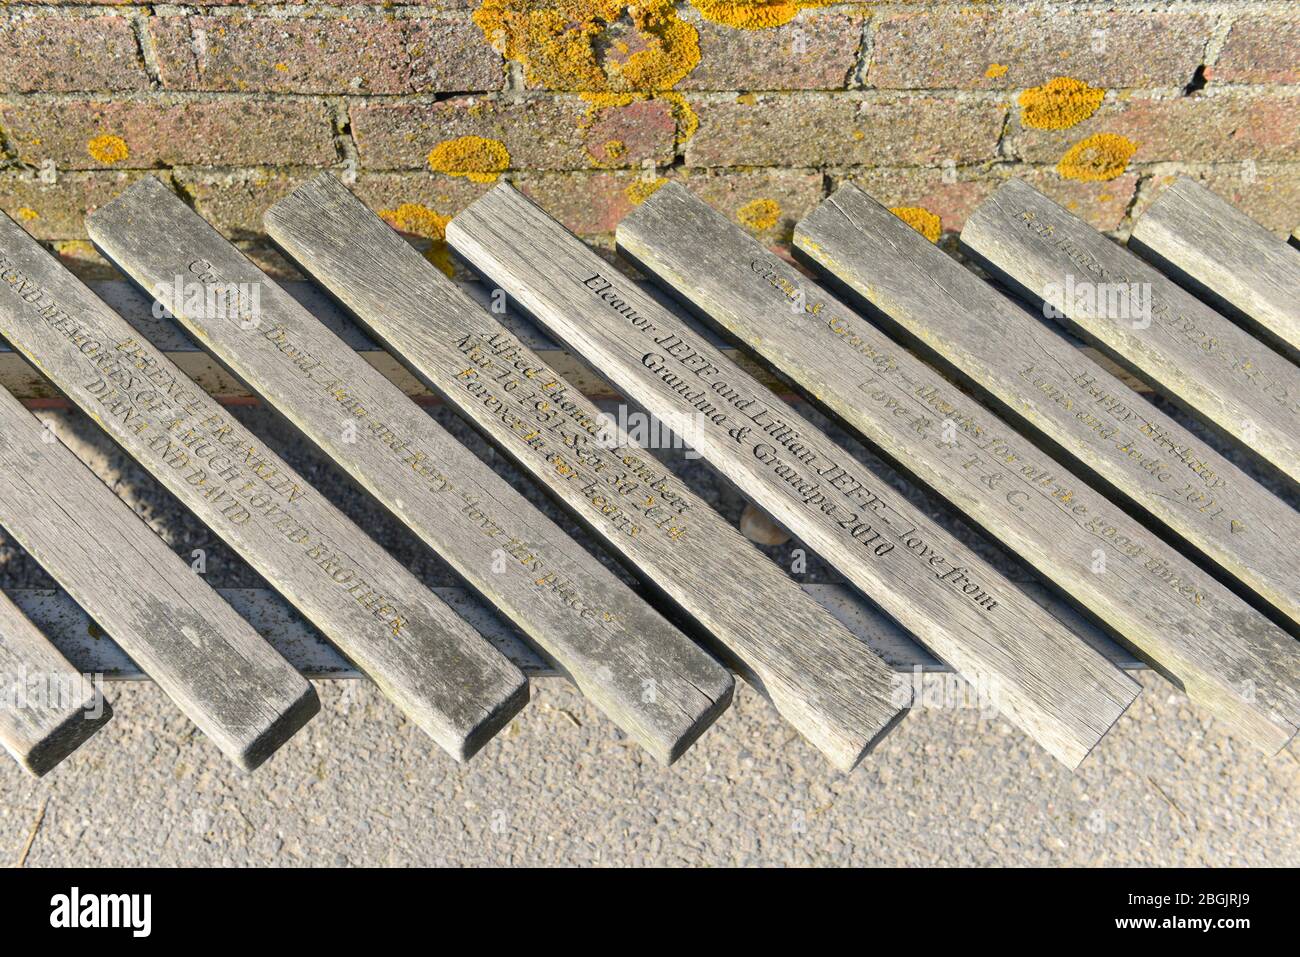 A small section of Britain's longest bench, the 324 m long bench on Littlehampton seafront in West Sussex, UK Stock Photo